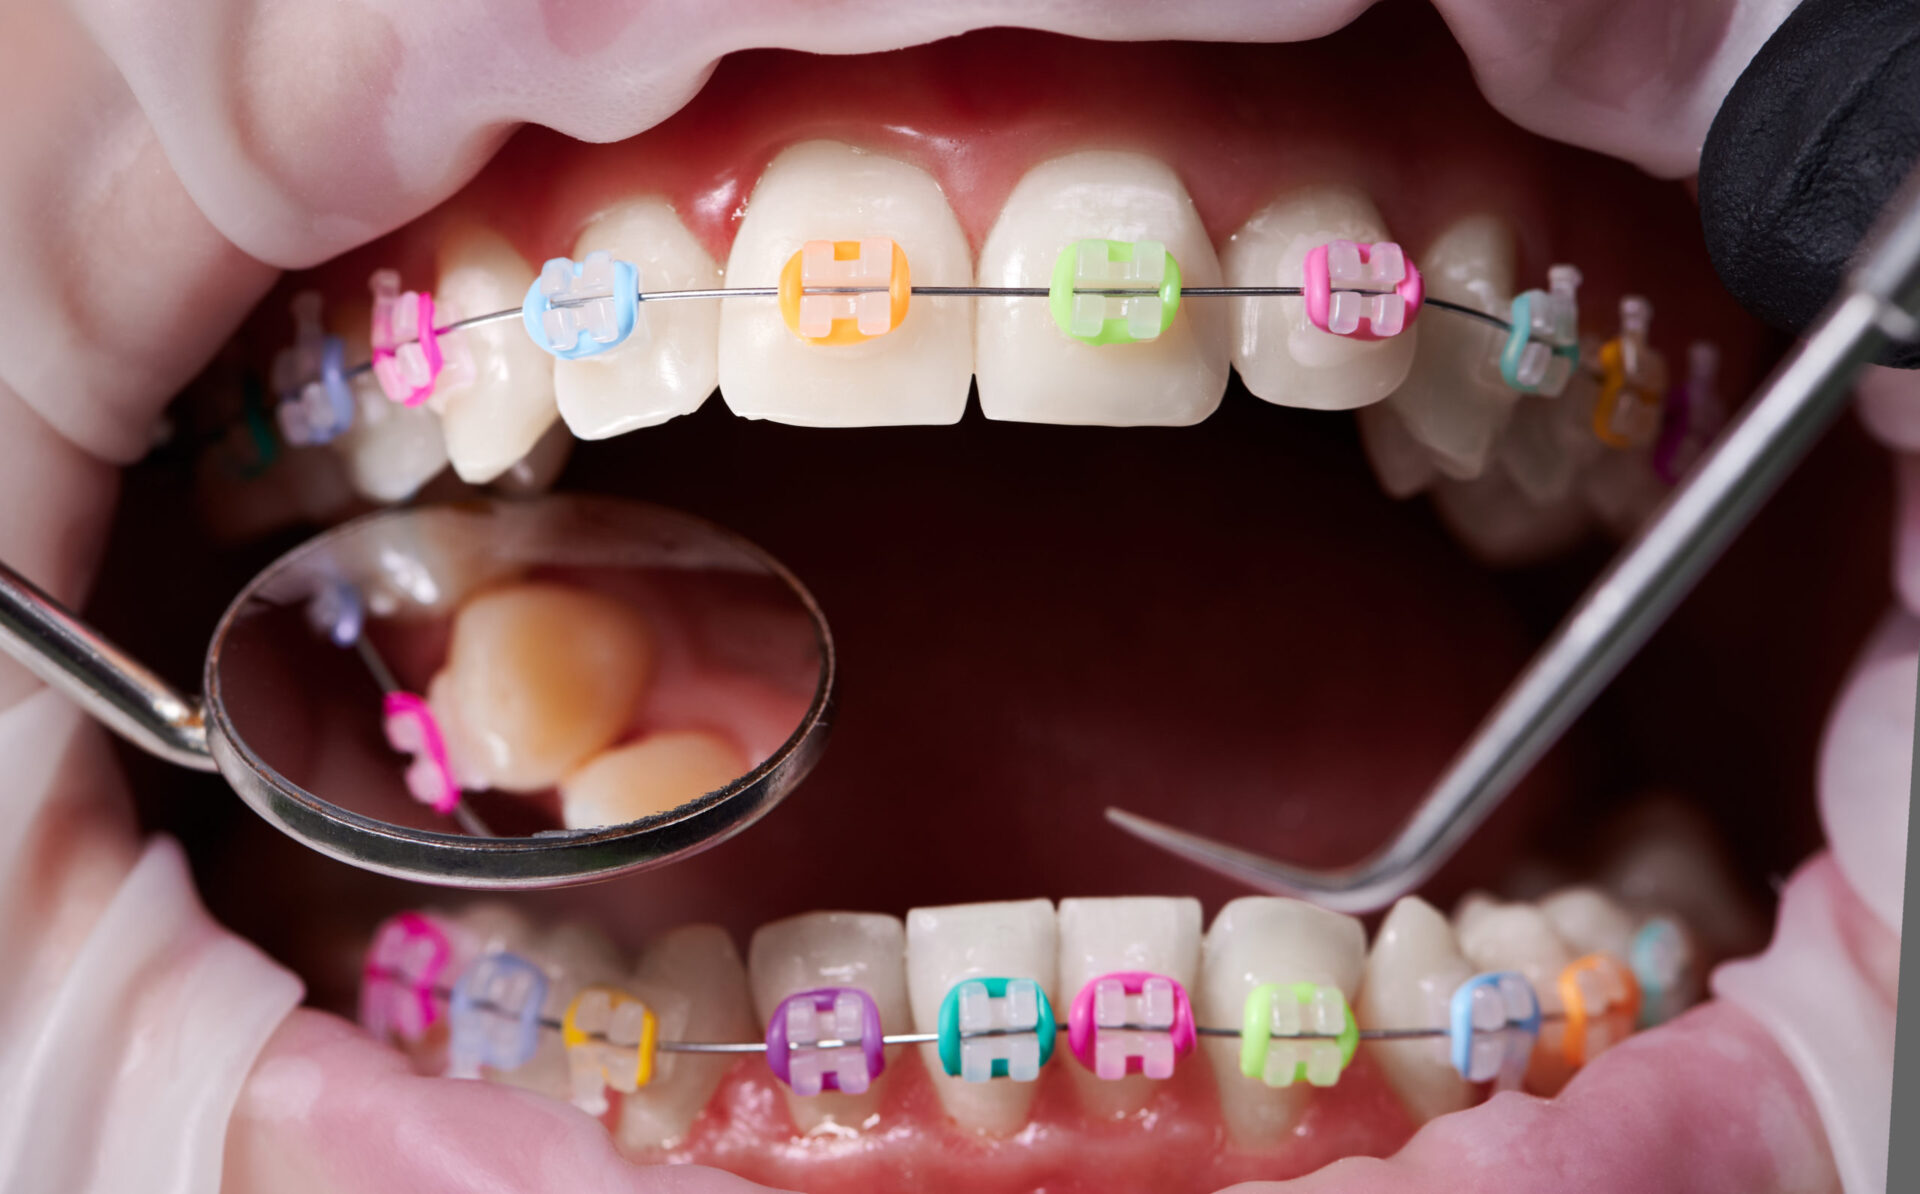 Dental procedure, process of attaching white ceramic braces with a help of colorful rubber bands